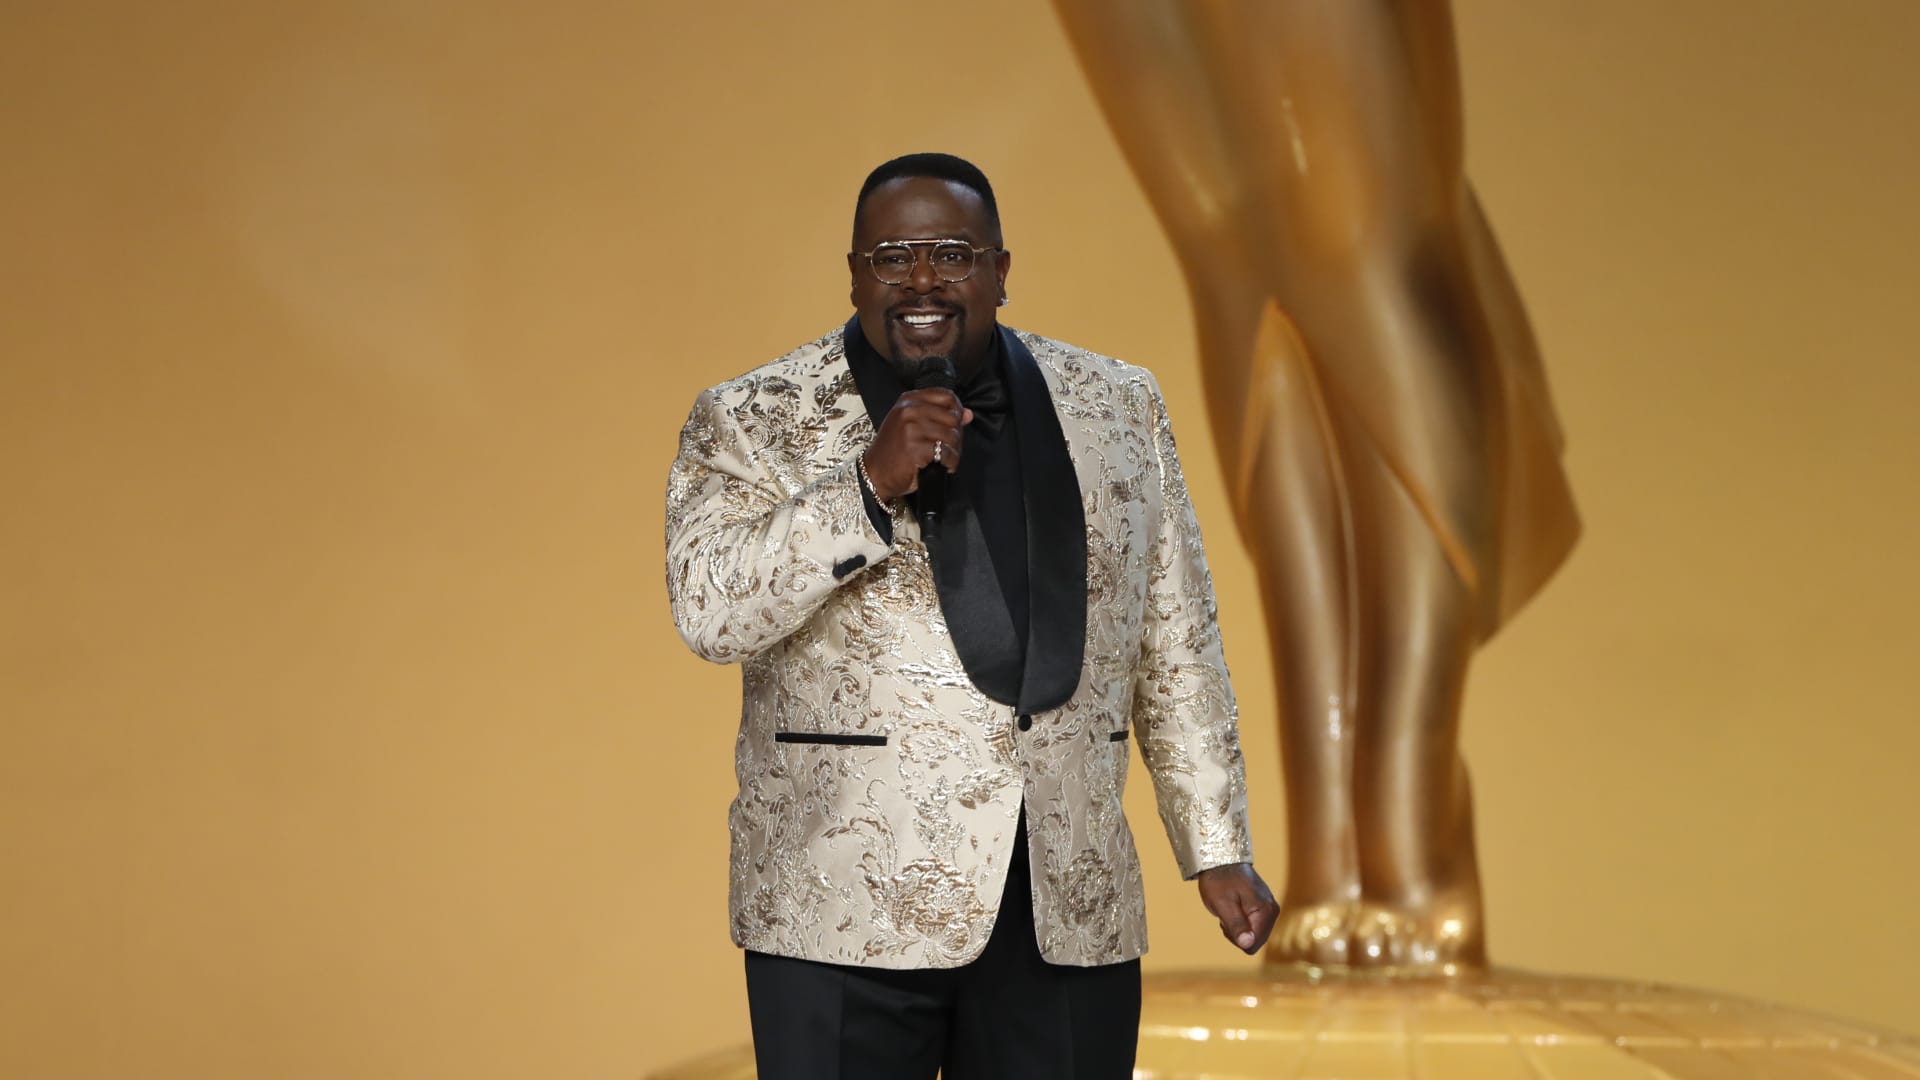 Cedric The Entertainer appears at the 73RD EMMY AWARDS, broadcast Sunday, Sept. 19 on the CBS Television Network.